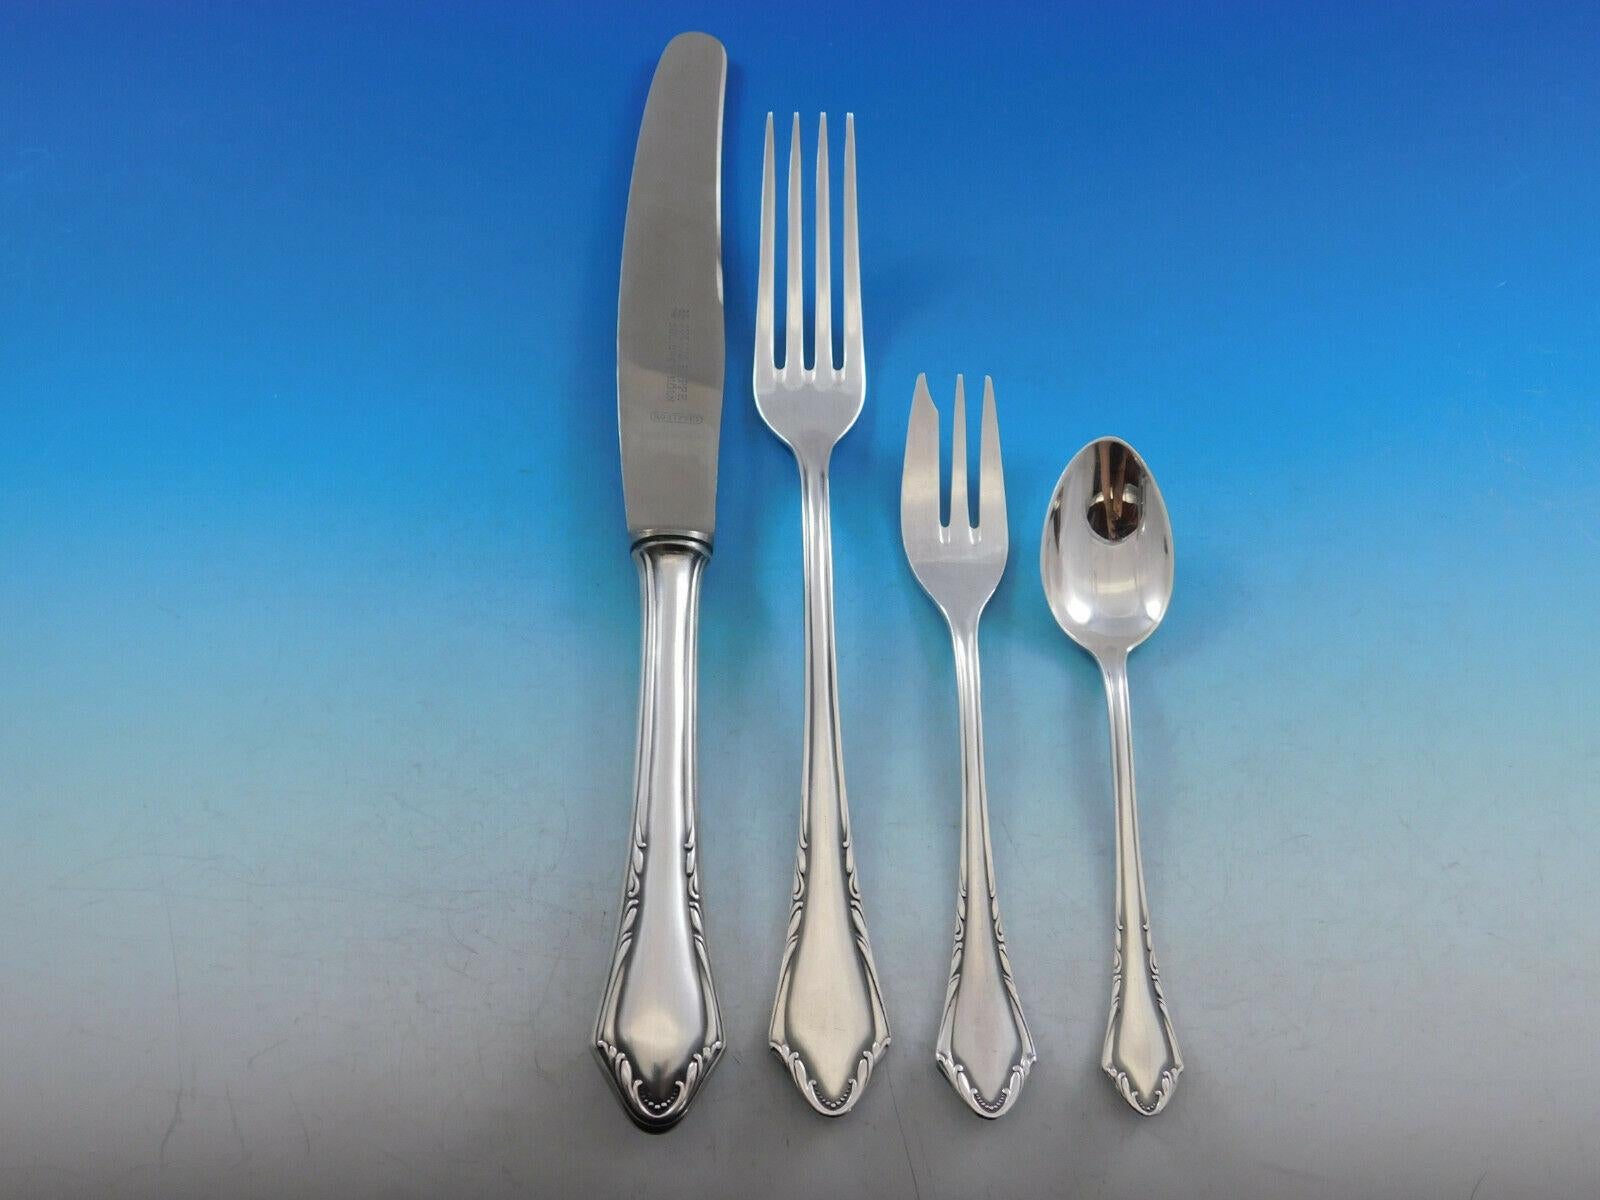 German Silverplated Flatware Set by Carl Eickhorn Solingen 102 Pc Dinner Service In Good Condition For Sale In Big Bend, WI